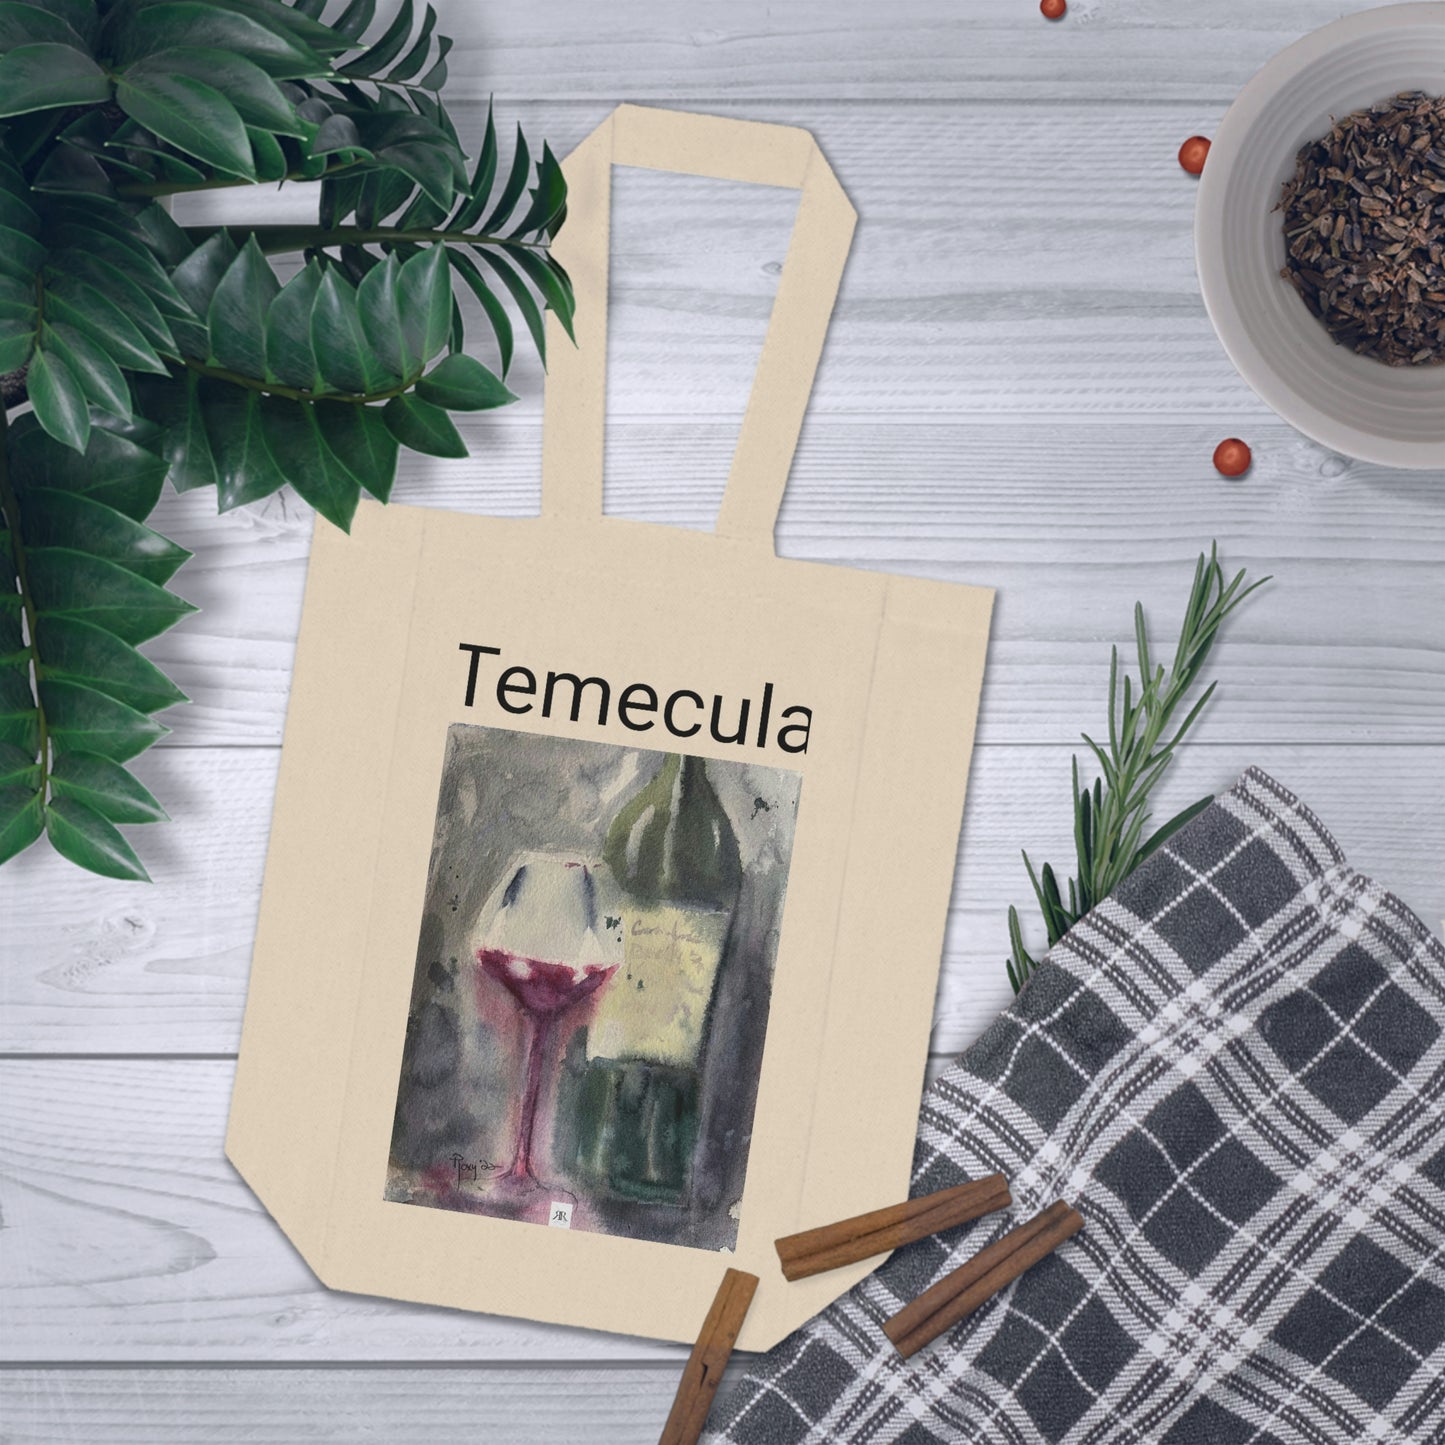 Temecula Double Wine Tote Bag featuring "Wine and Bottle" painting